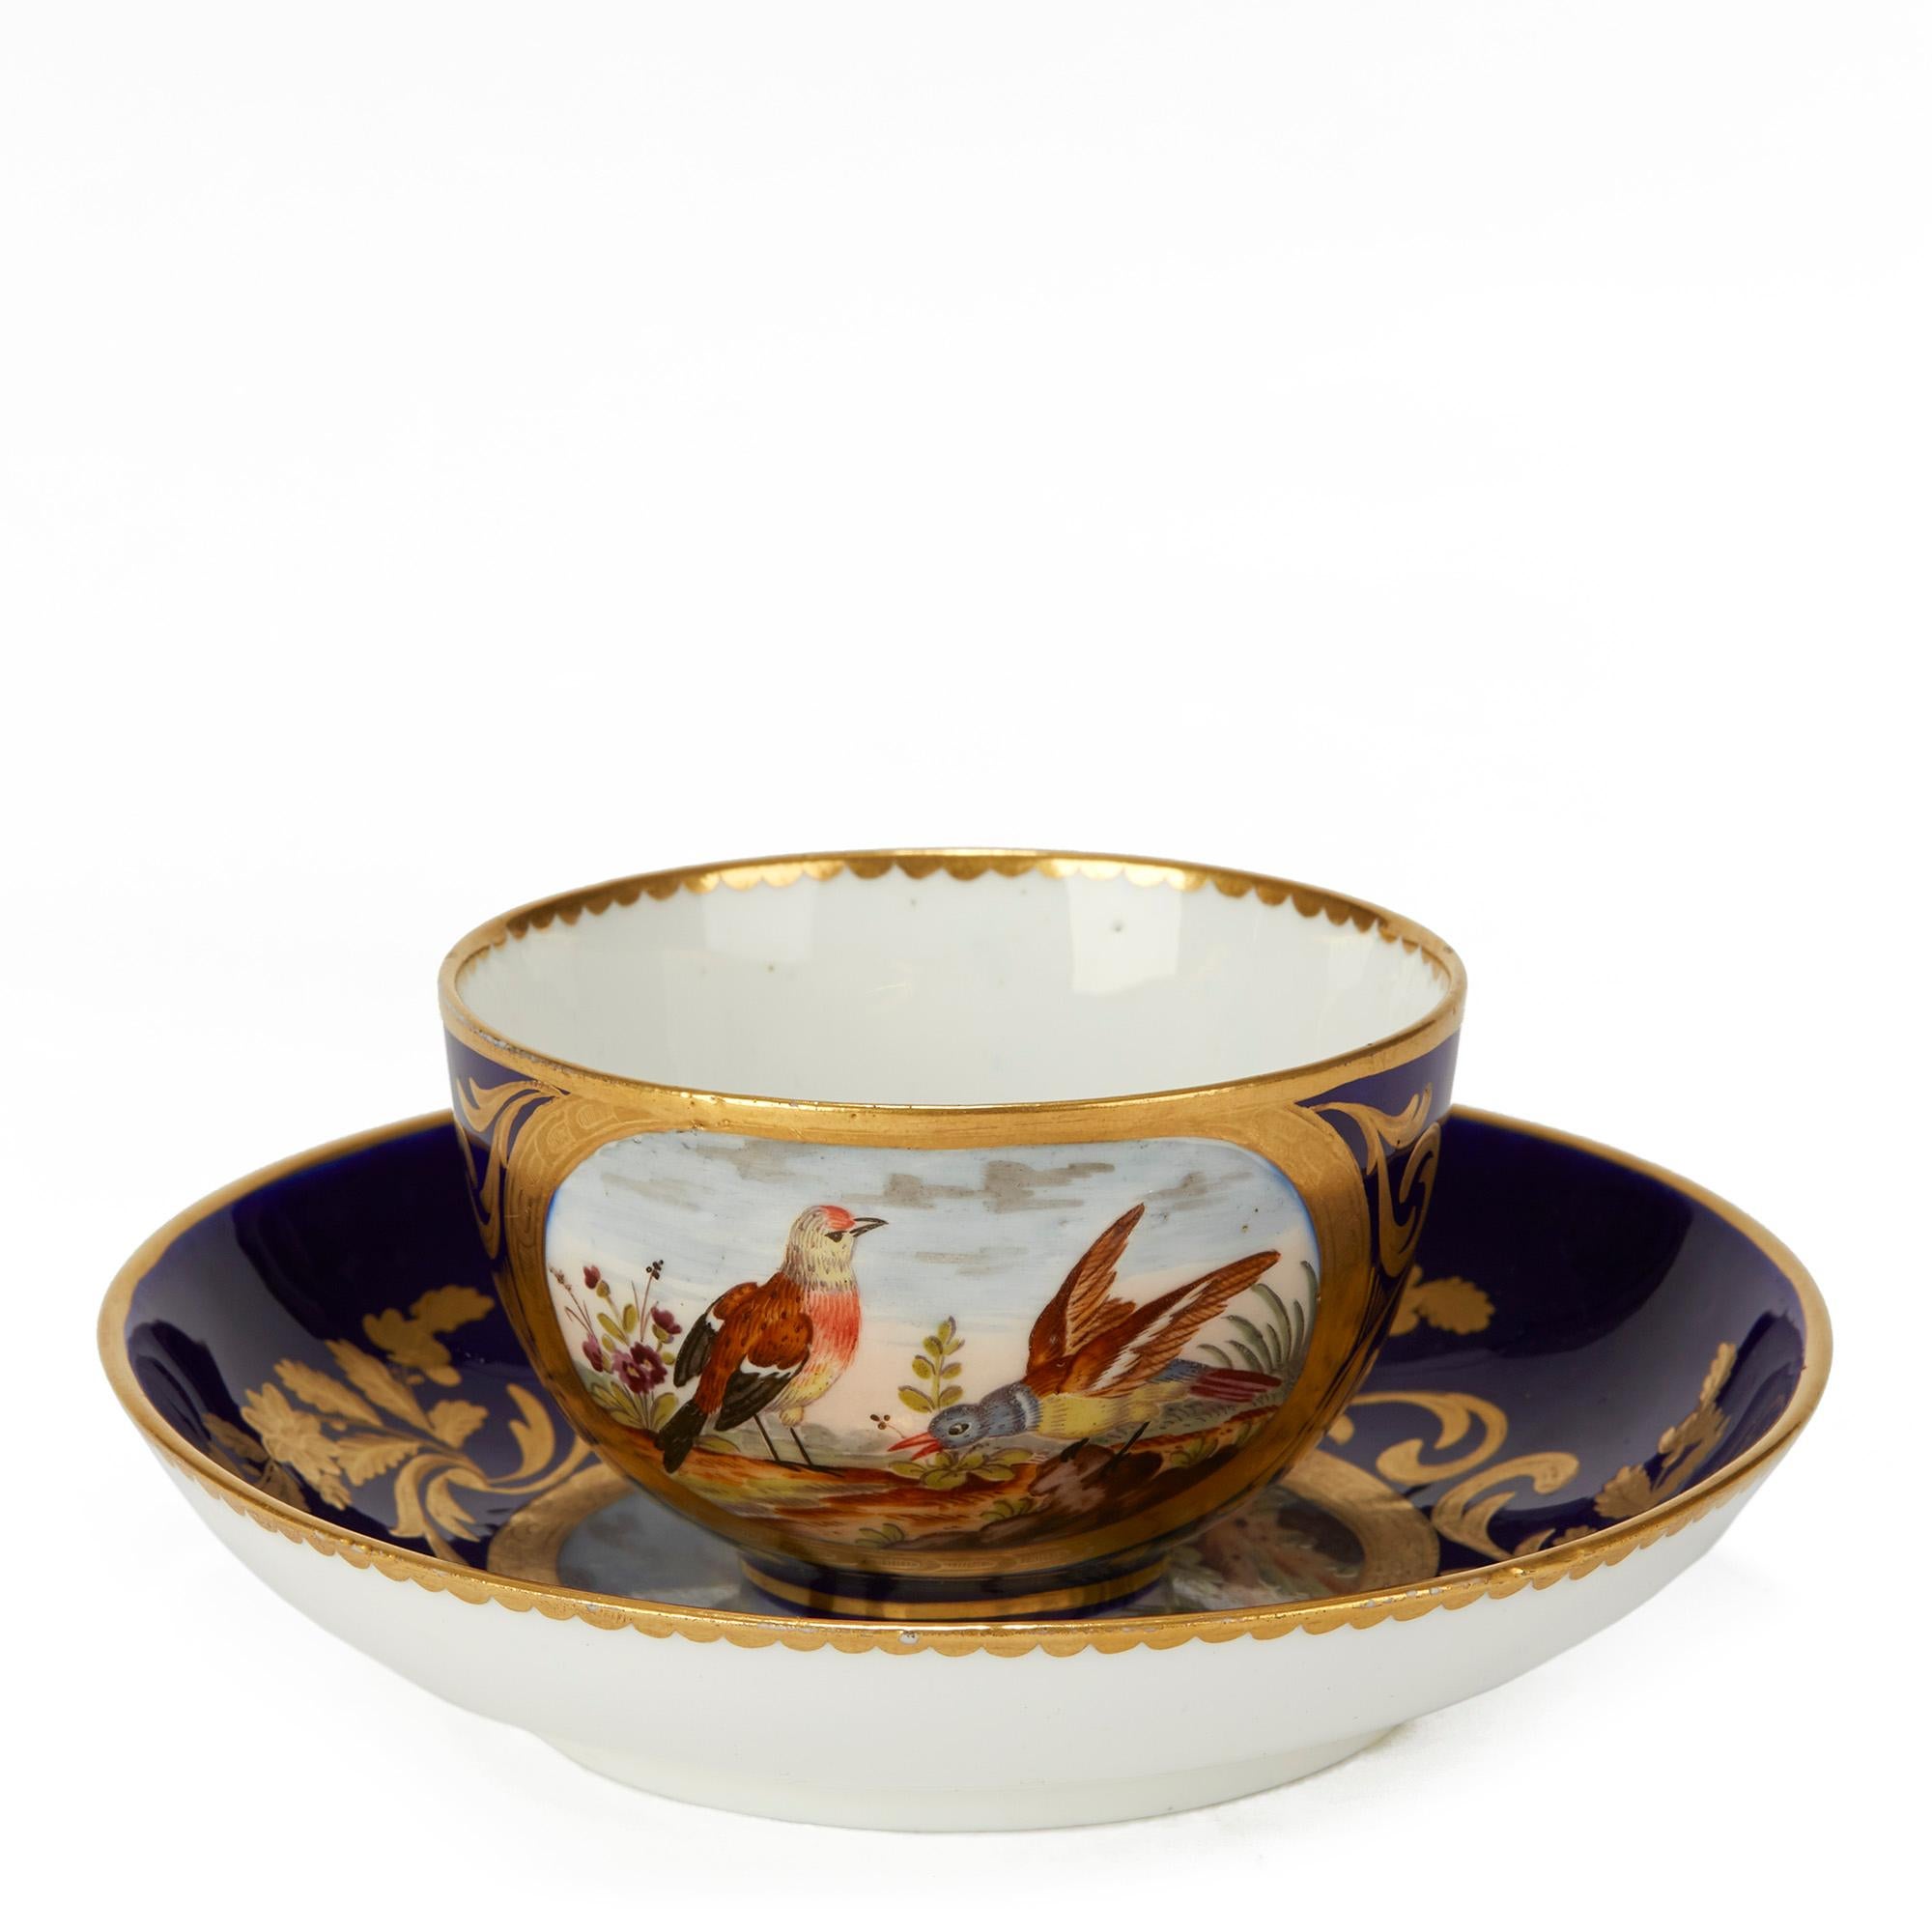 Sèvres French Porcelain Hand Painted Teacup and Saucer with Bird Scenes, 1791 For Sale 2